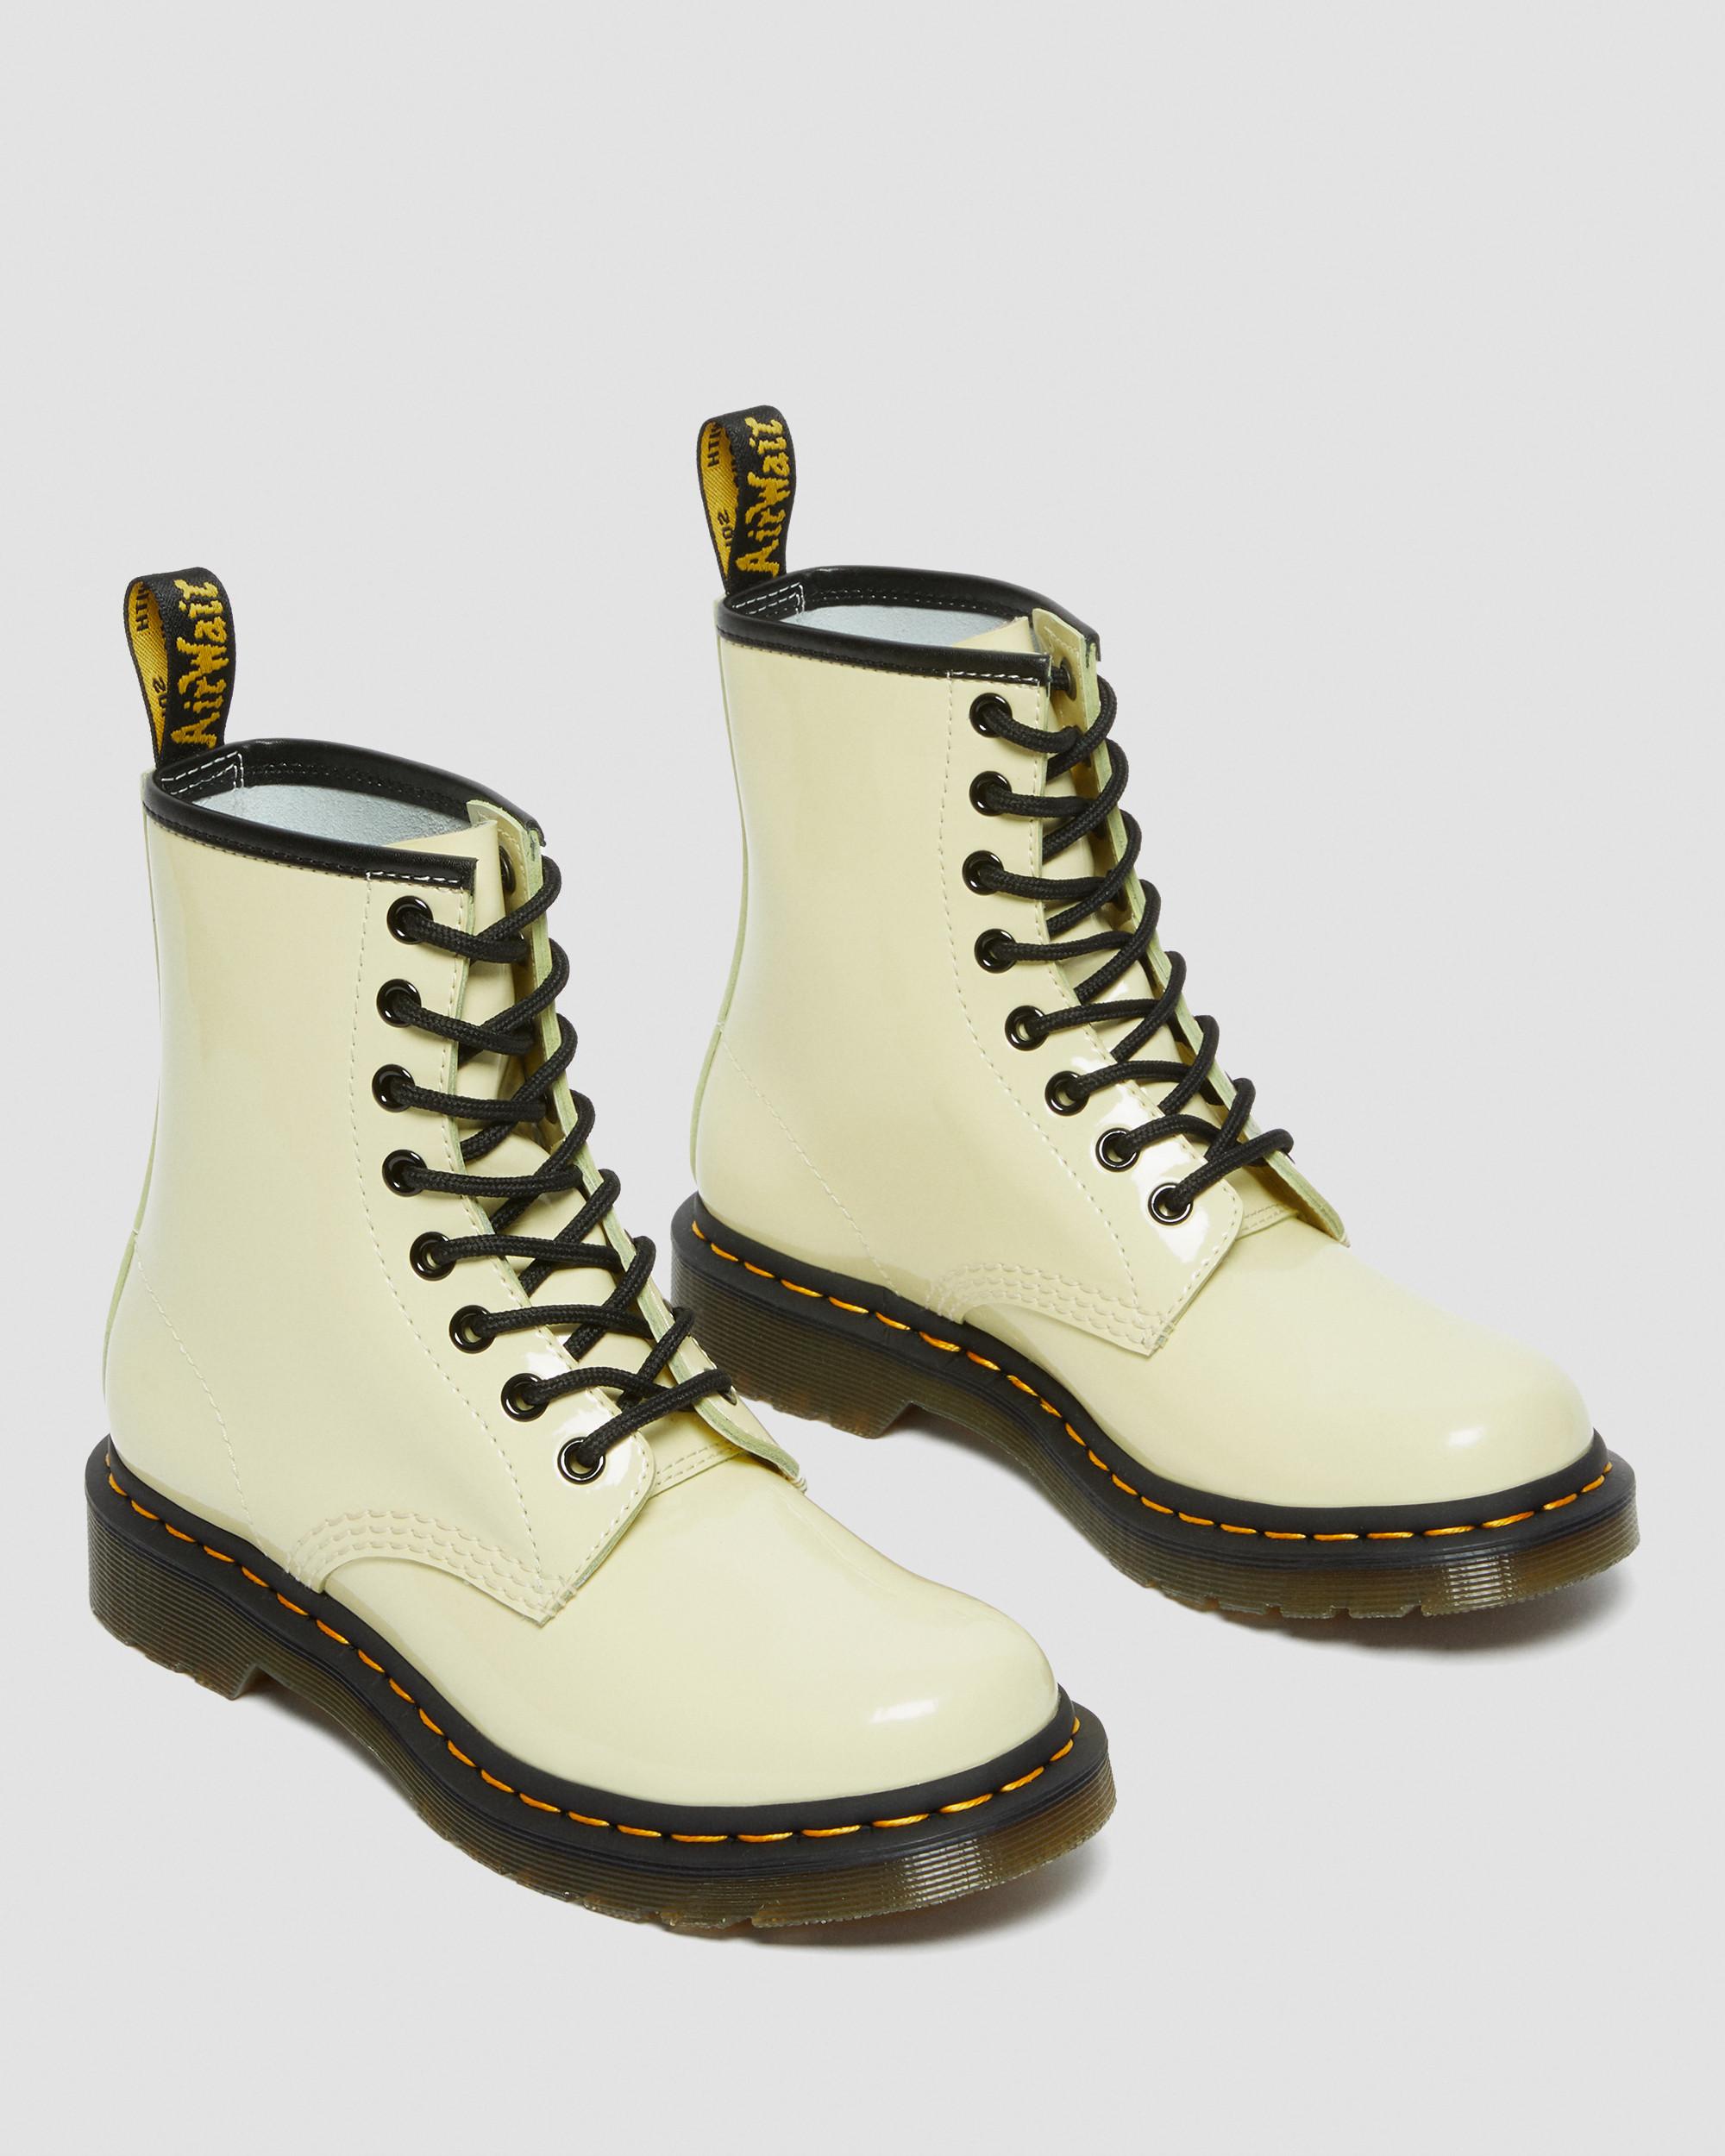 1460 Women's Patent Leather Lace Up Boots1460 Patent Leather Lace Up Boots Dr. Martens